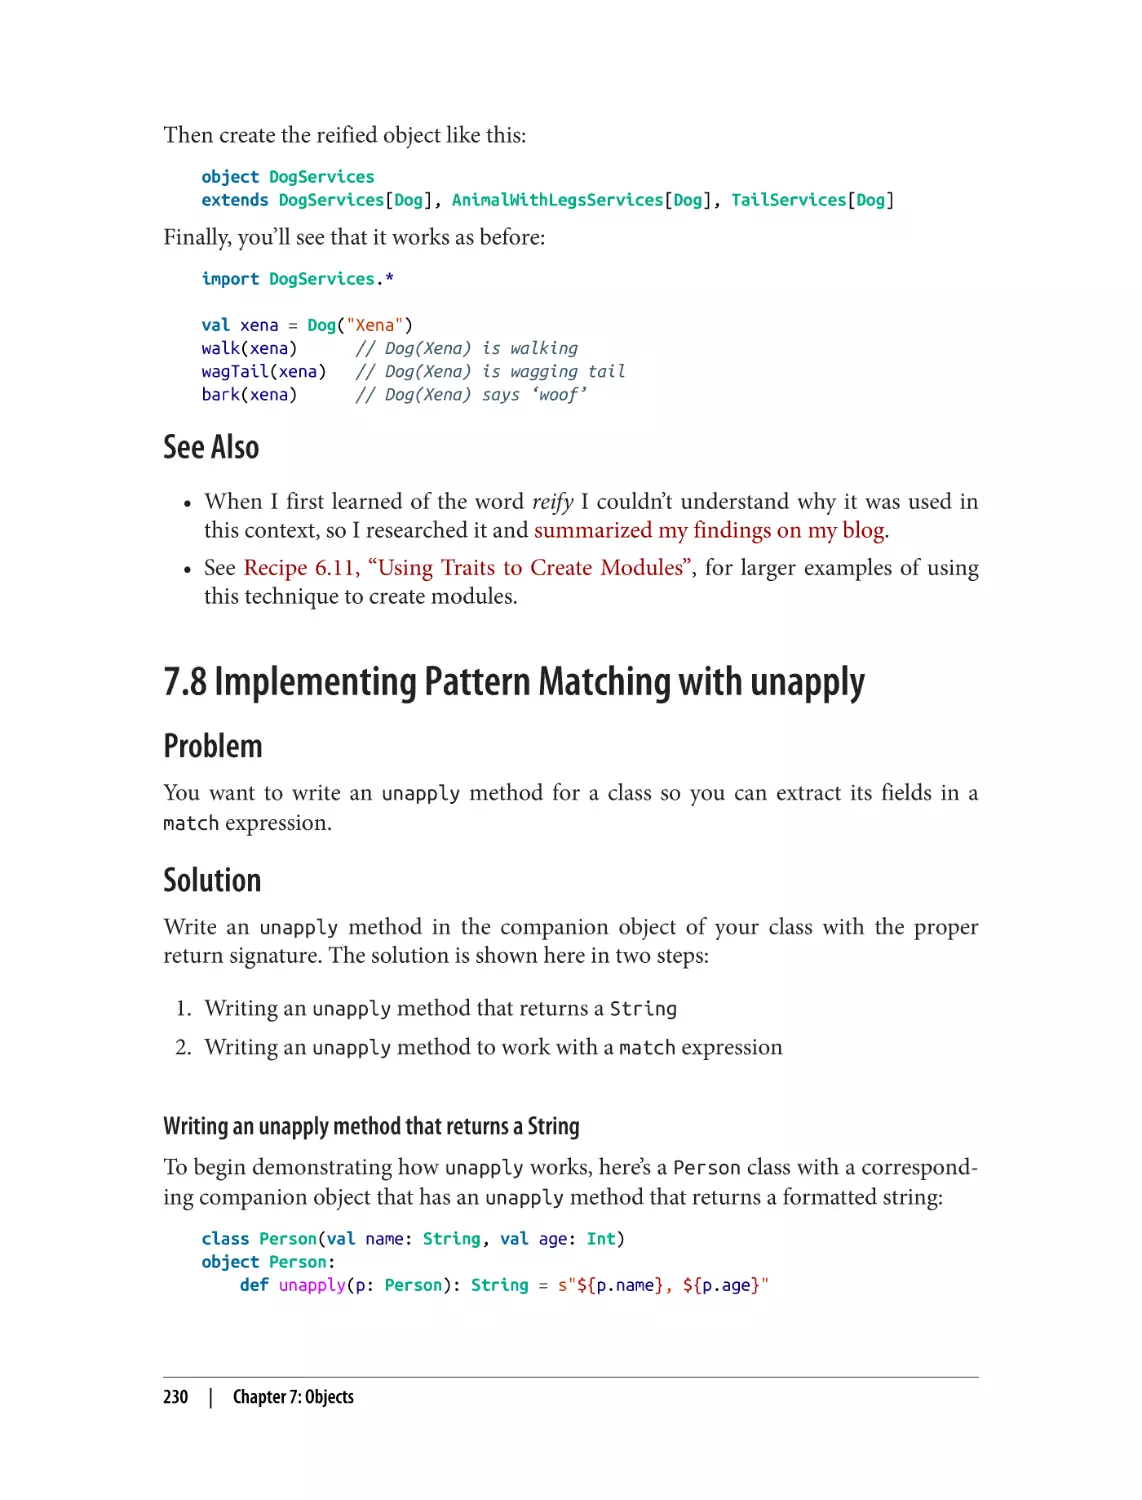 See Also
7.8 Implementing Pattern Matching with unapply
Problem
Solution